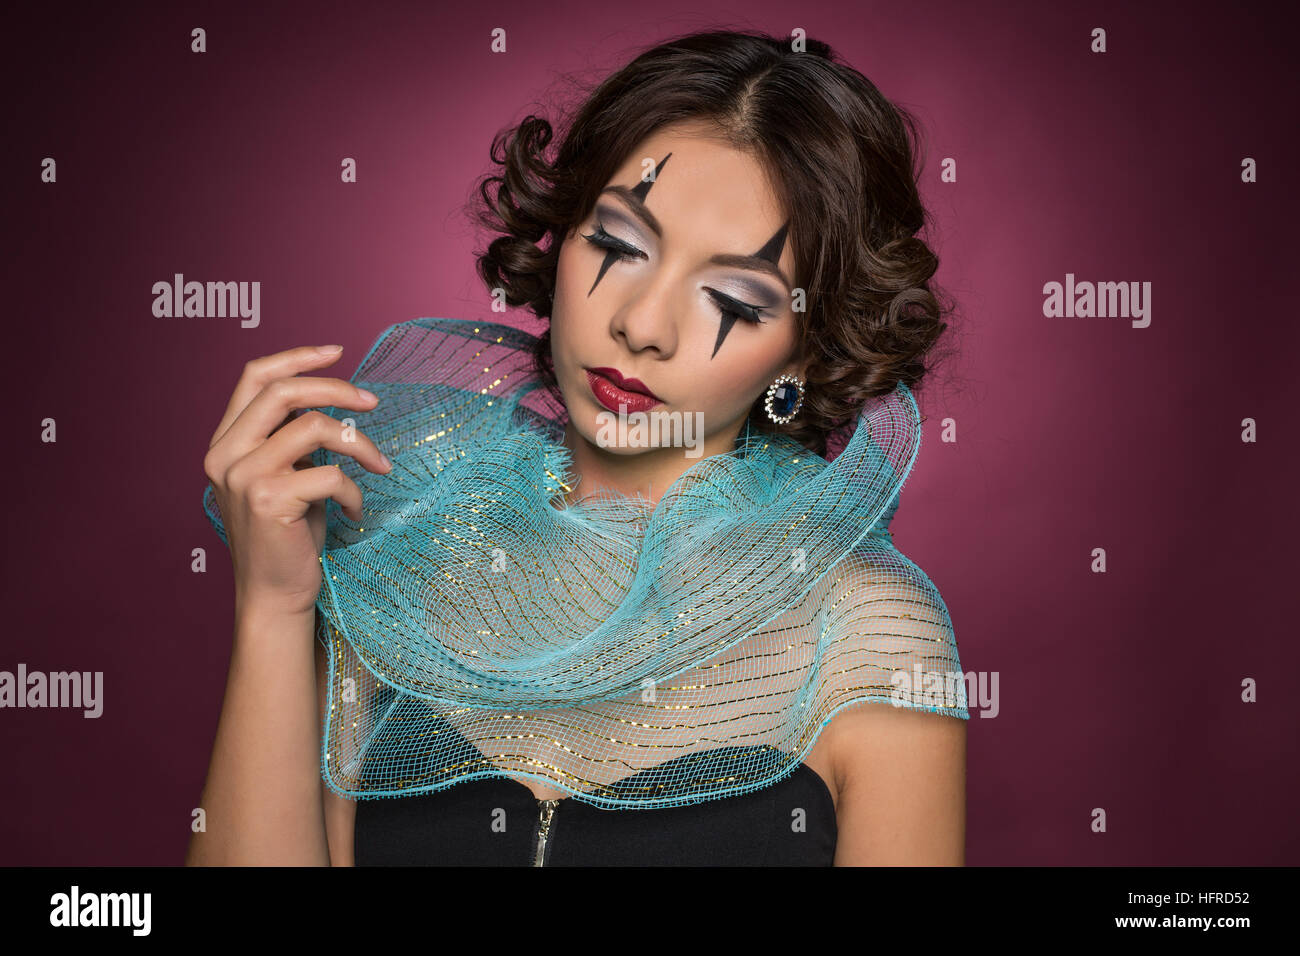 Portrait of young woman, harlequin makeup Stock Photo